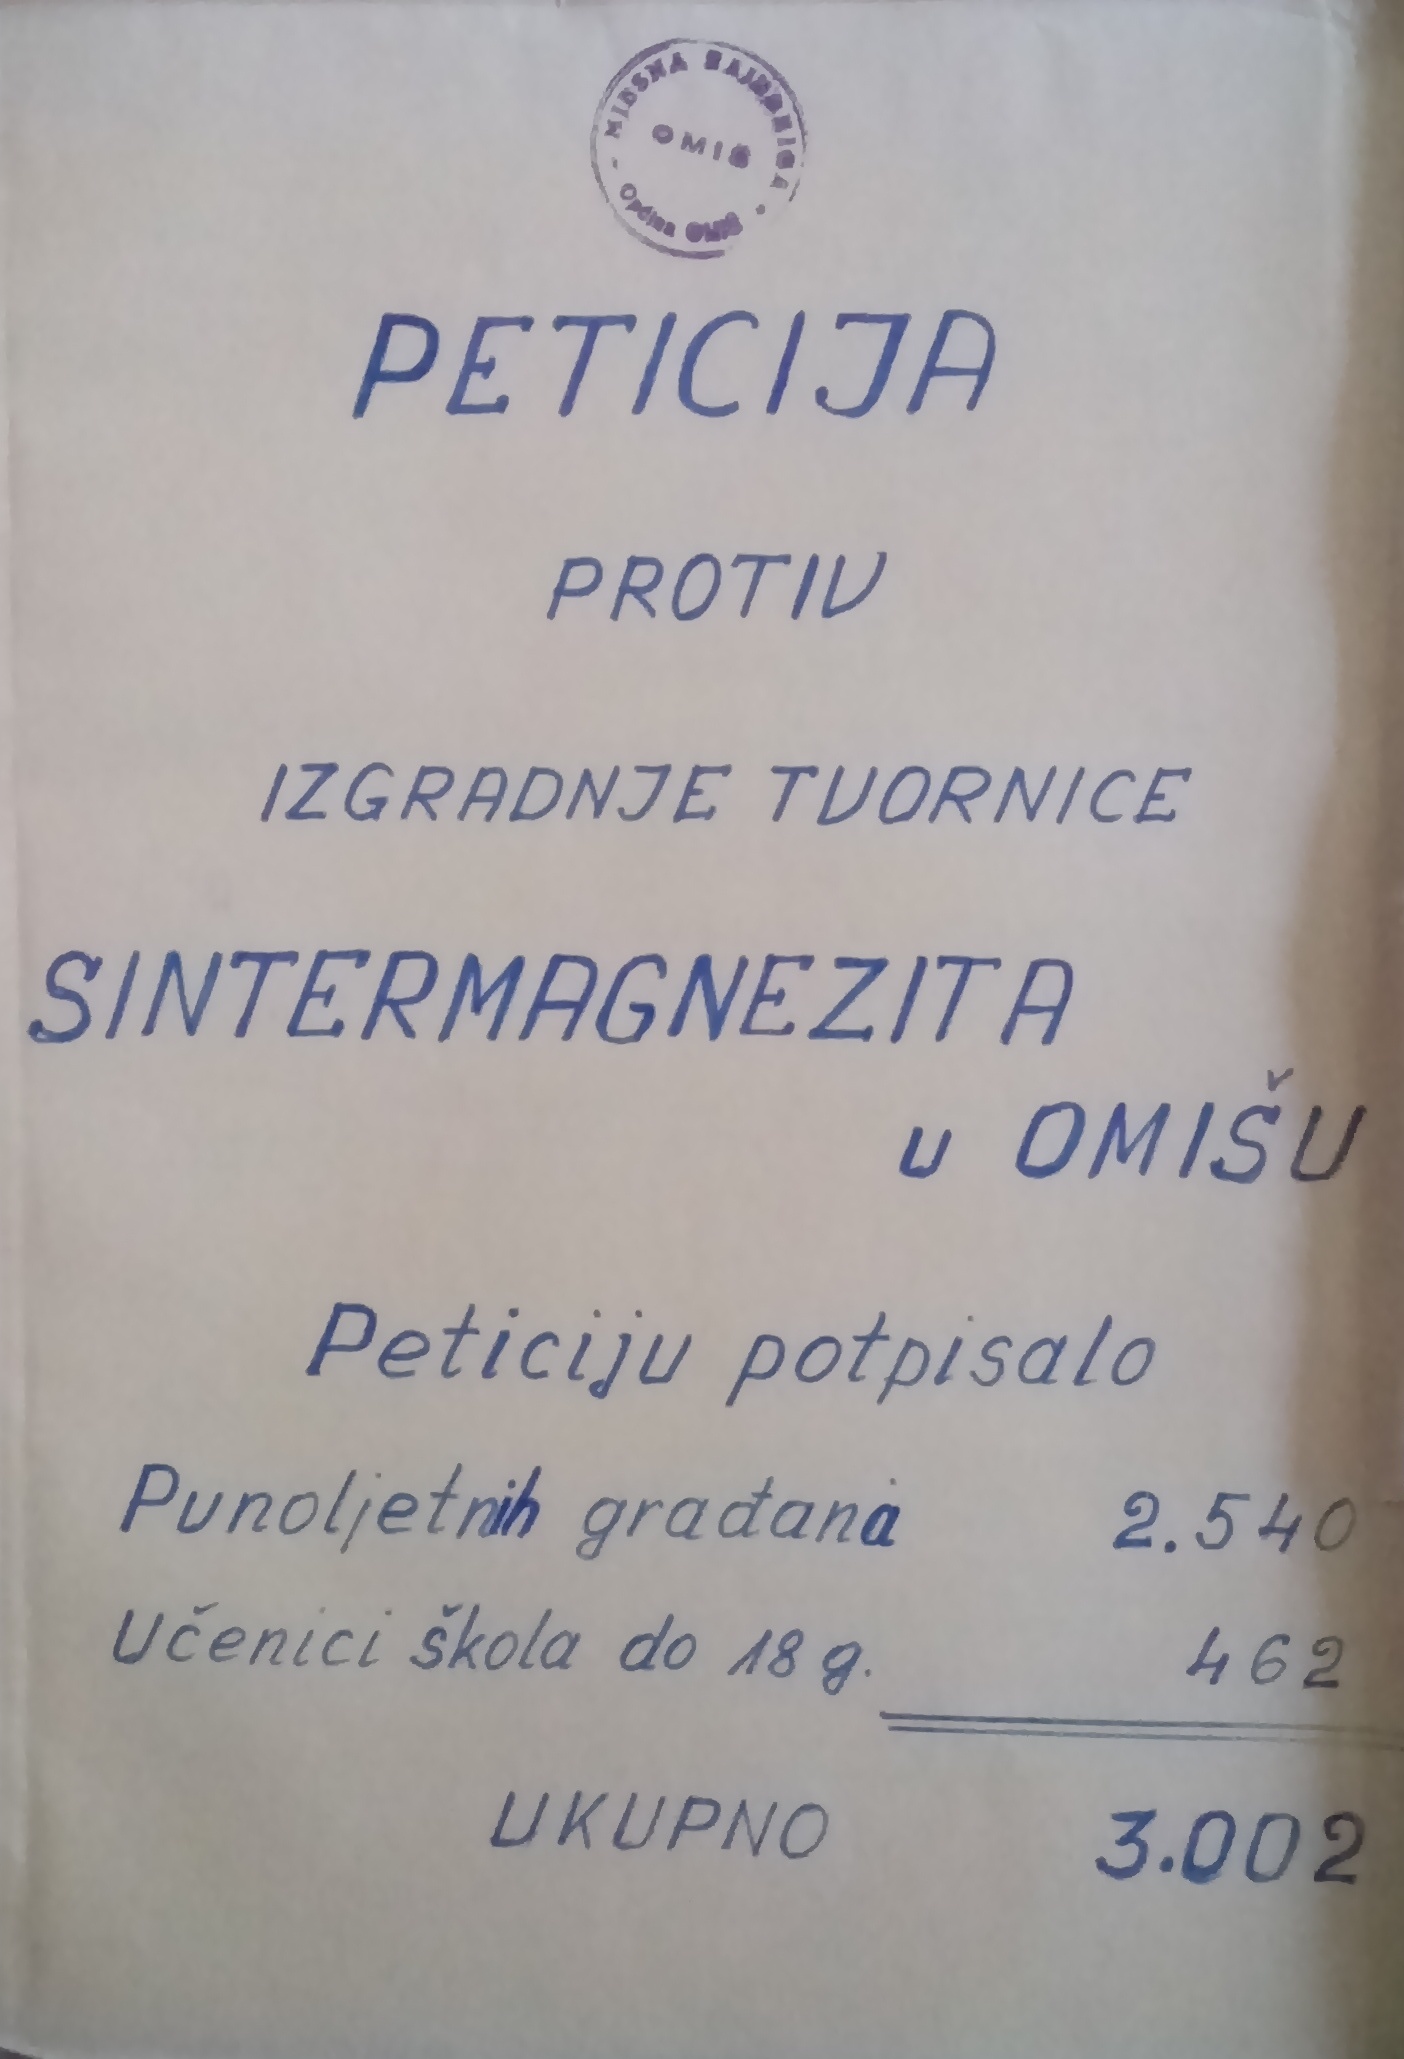 Original cover of the protest letter of 1979 opposing construction of a sintered magnesia factory in Omiš (2018-05-23).